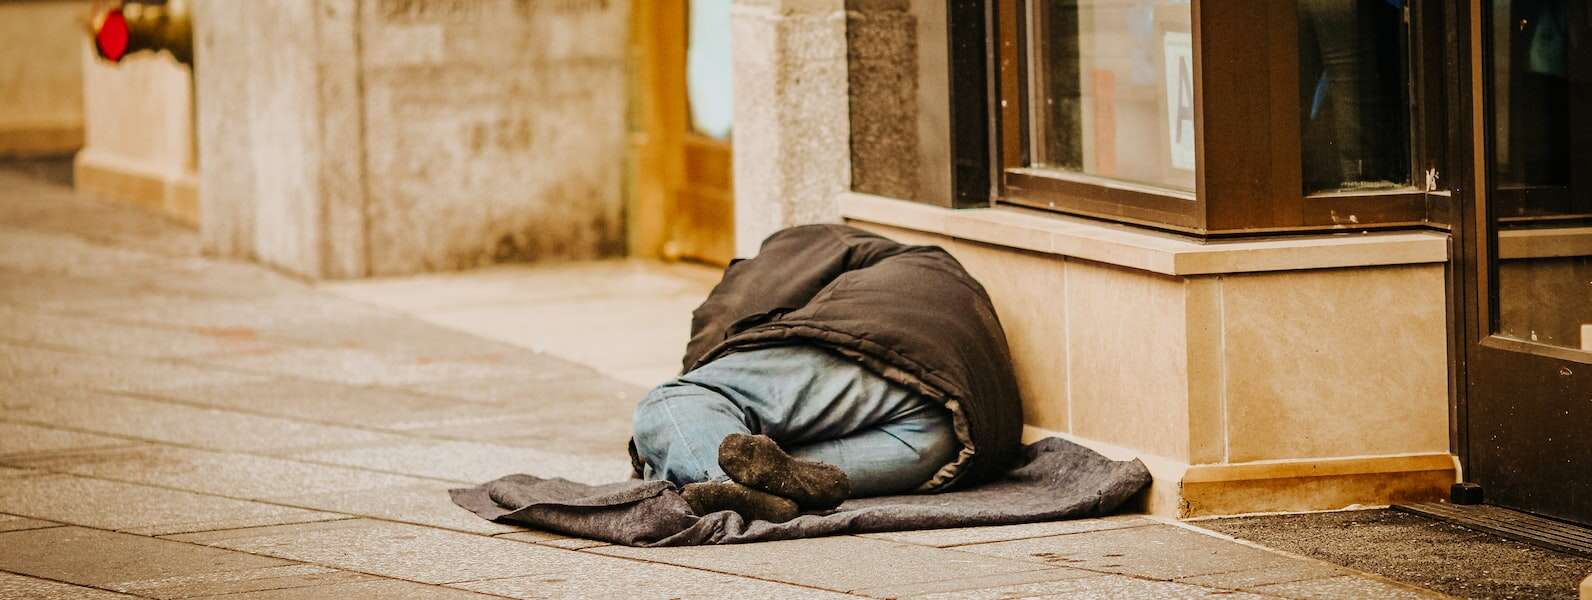 A person in a coat, jeans and black socks lies on a sidewalk in front of a store.